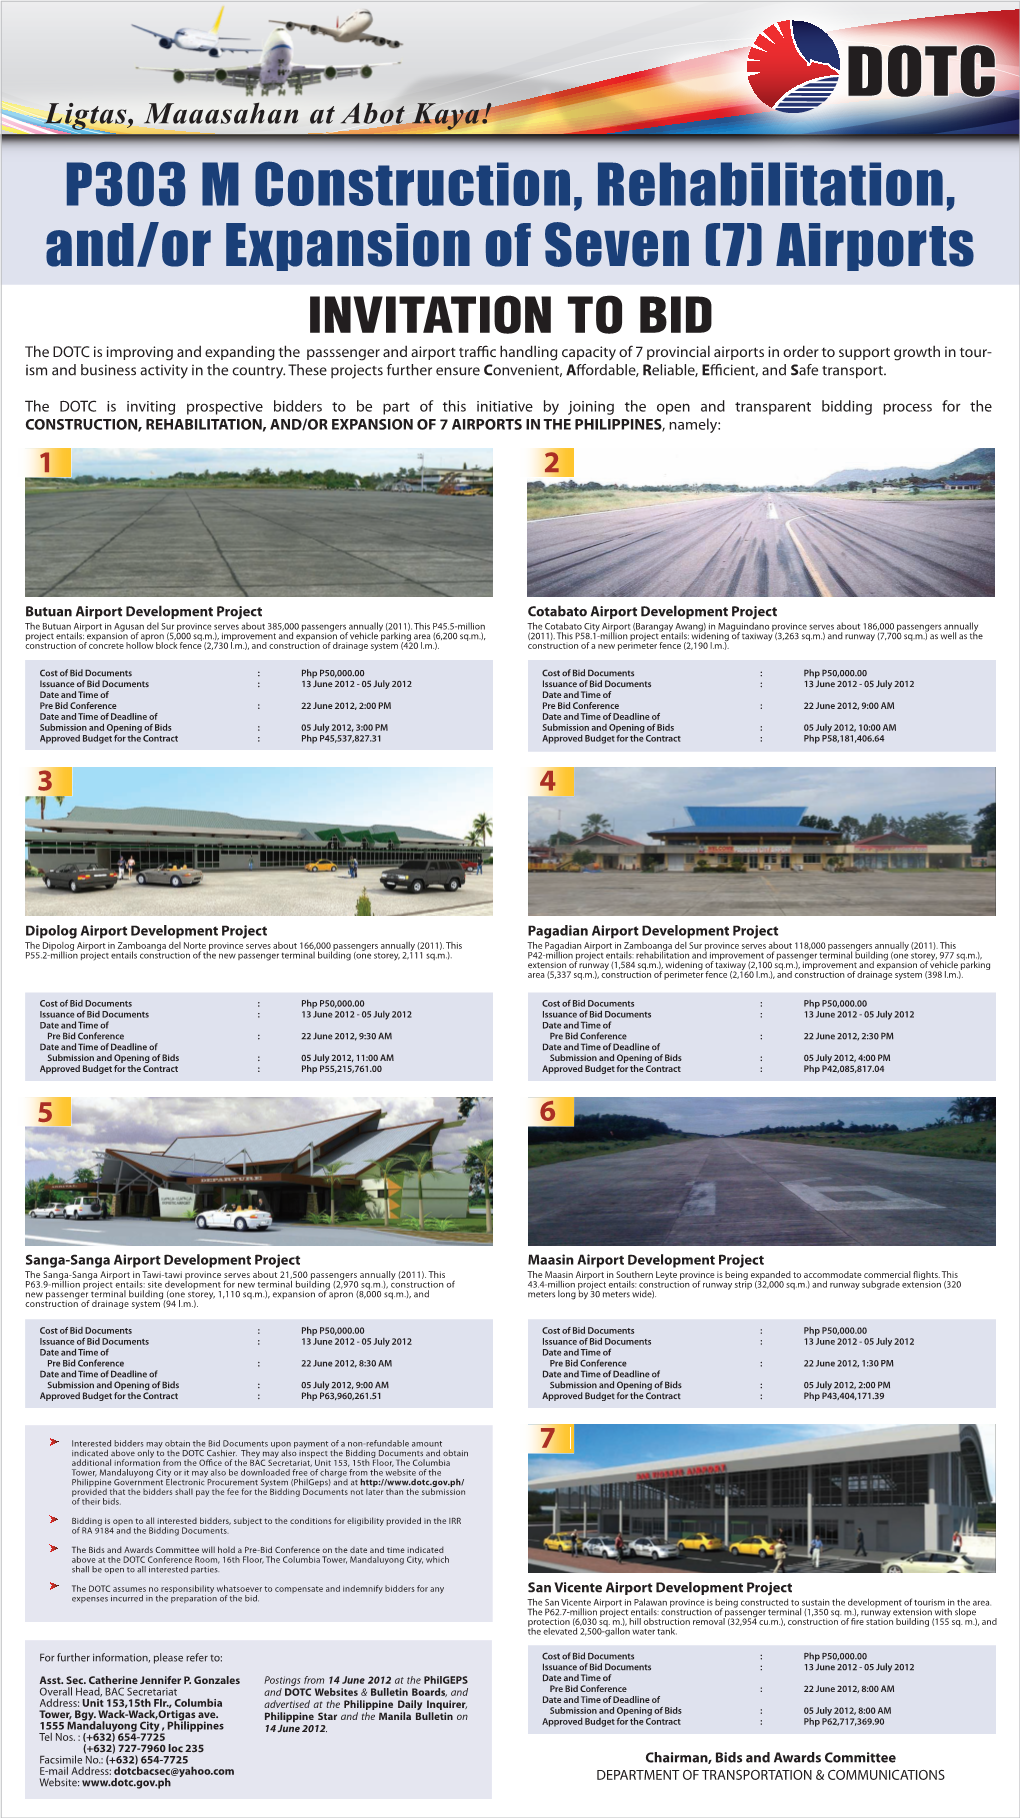 P303 M Construction, Rehabilitation, And/Or Expansion of Seven (7) Airports